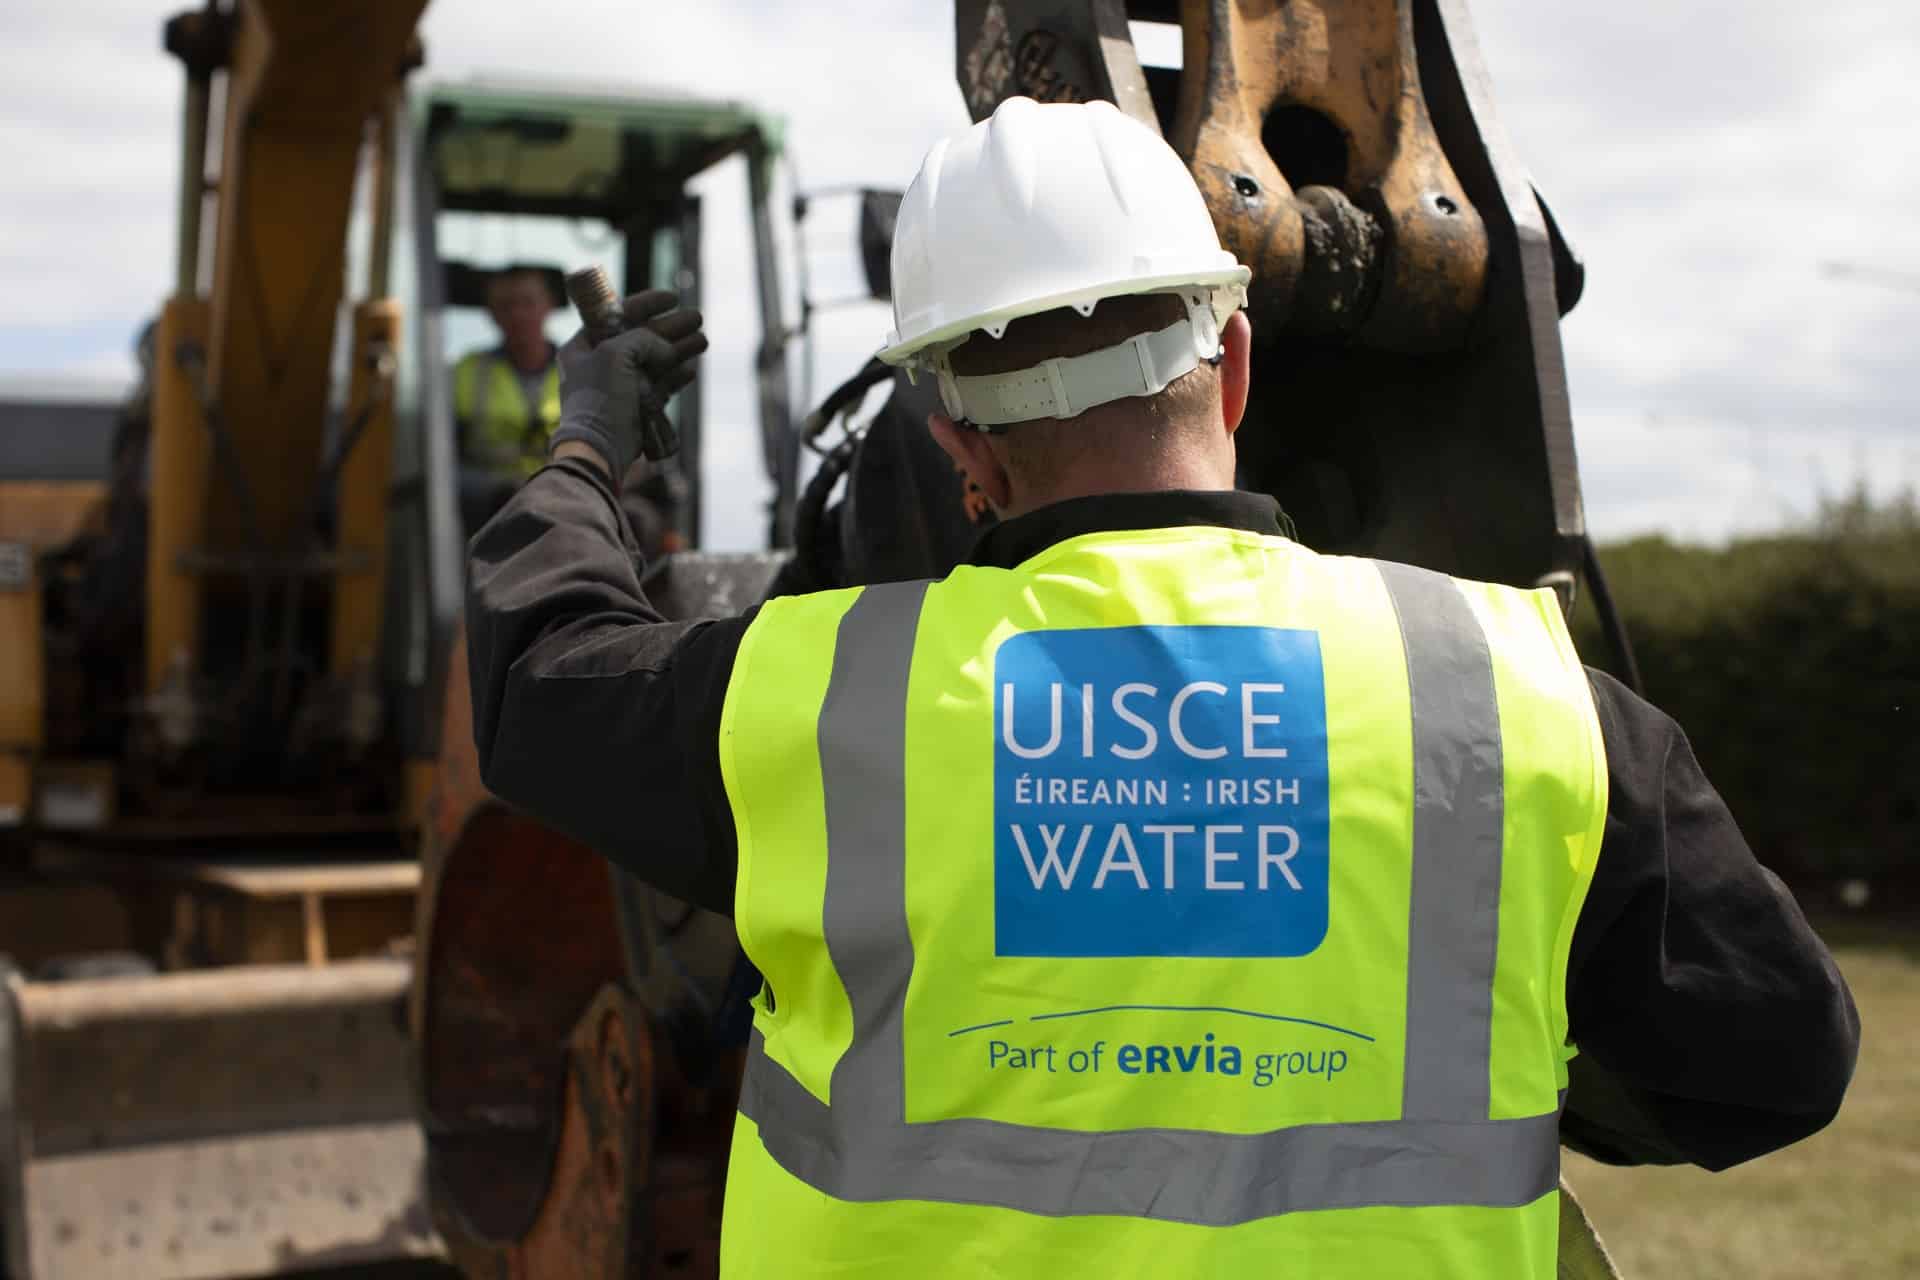 Works to recommence on the Bandon Water Main and Sewer Network Project